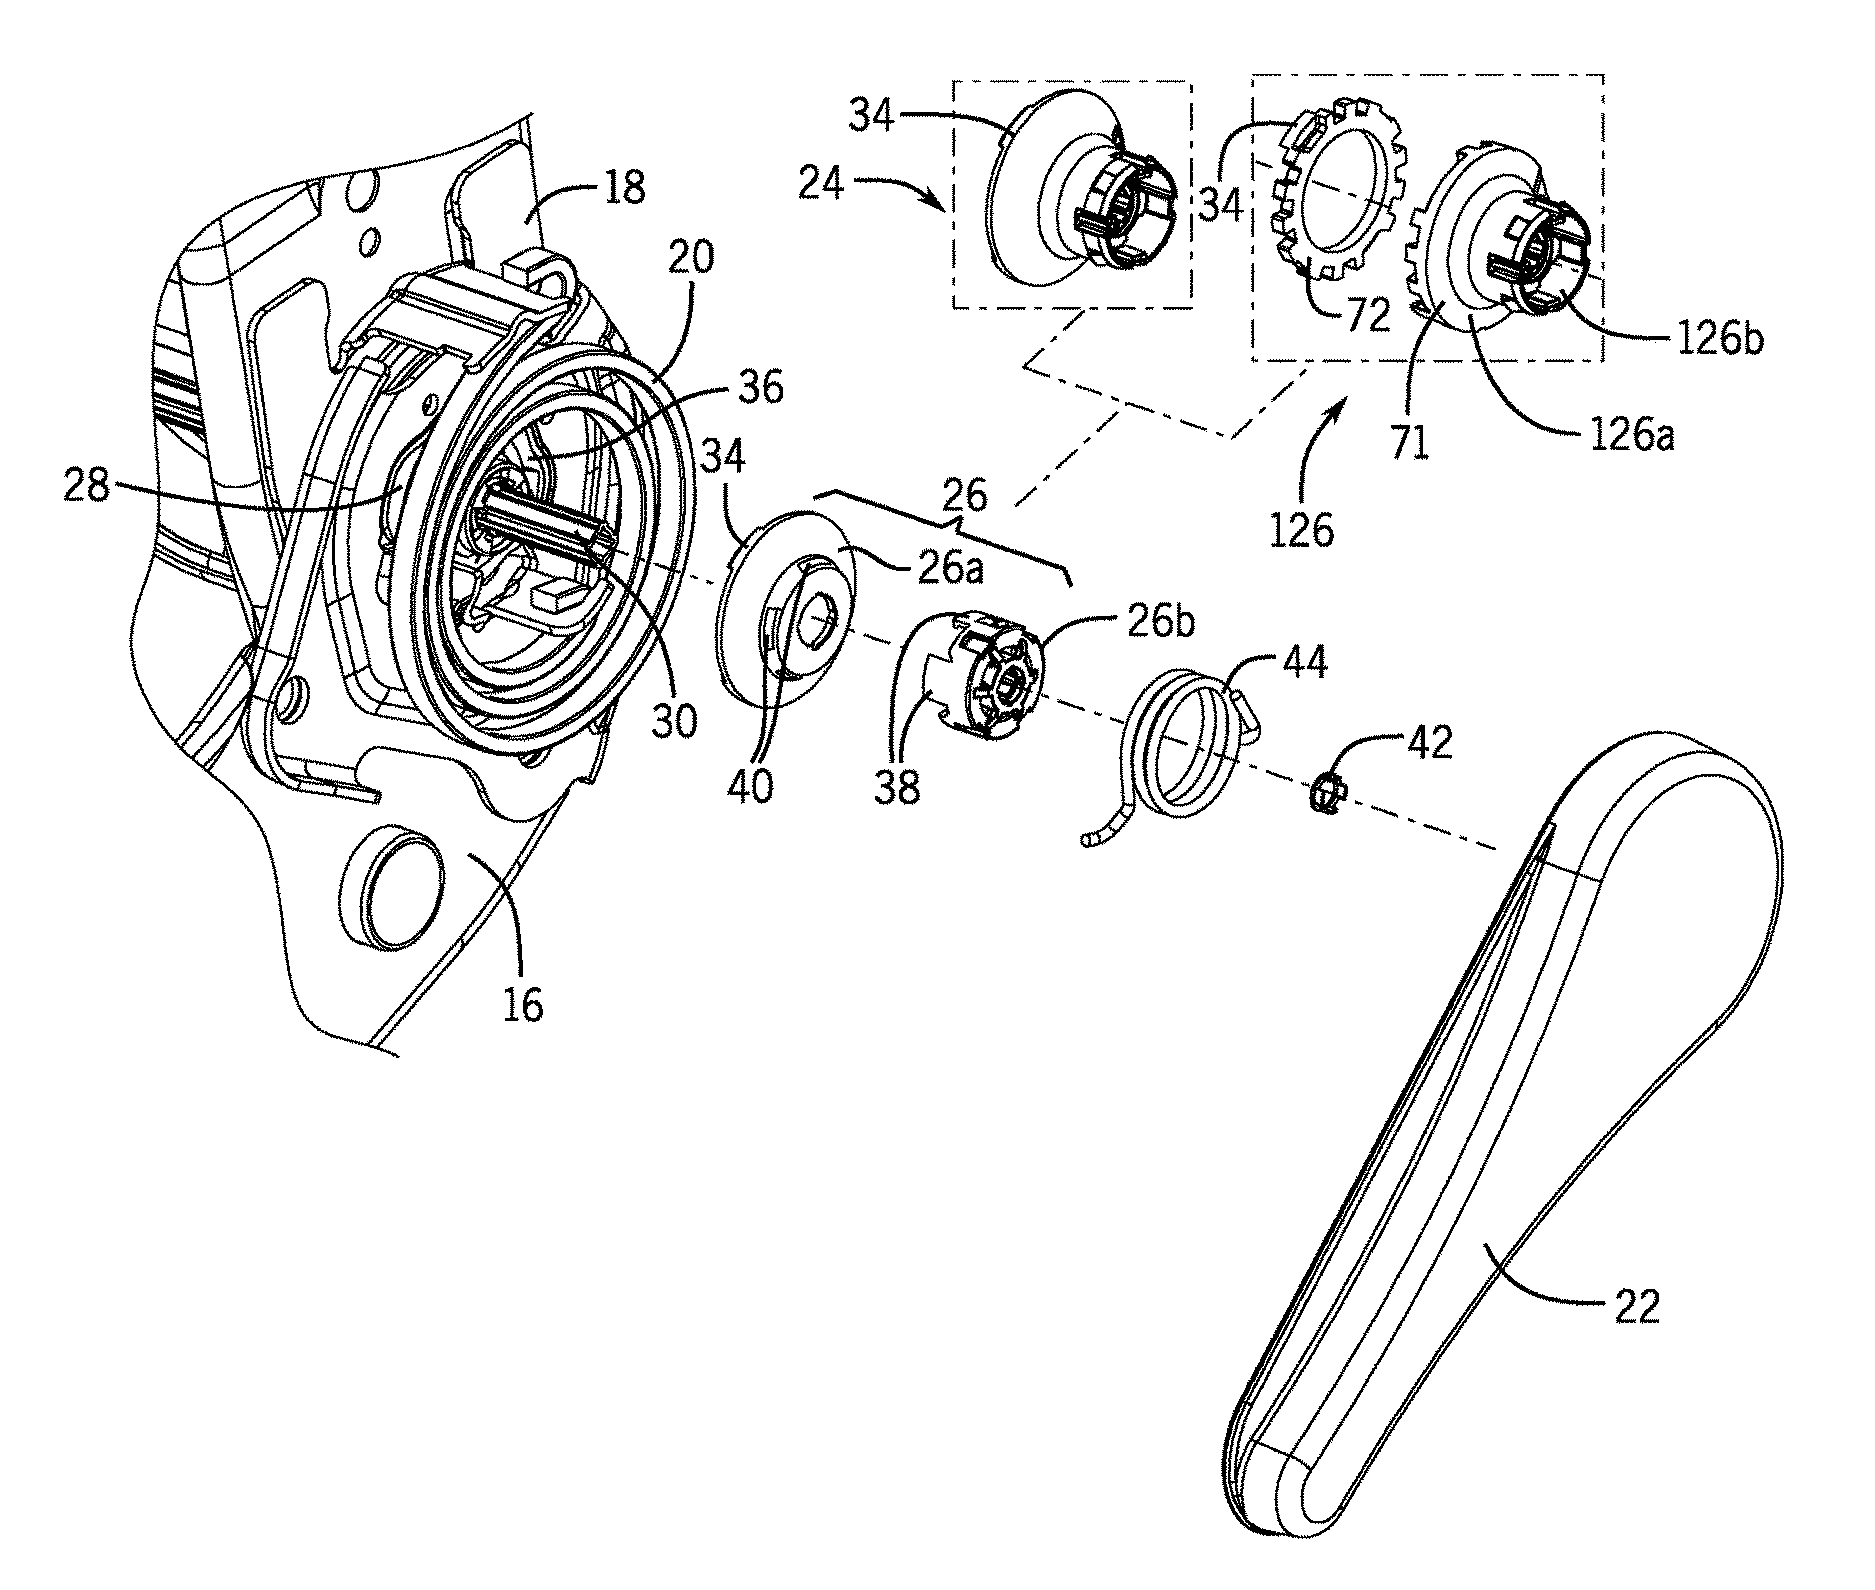 Vehicle seat recliner assembly